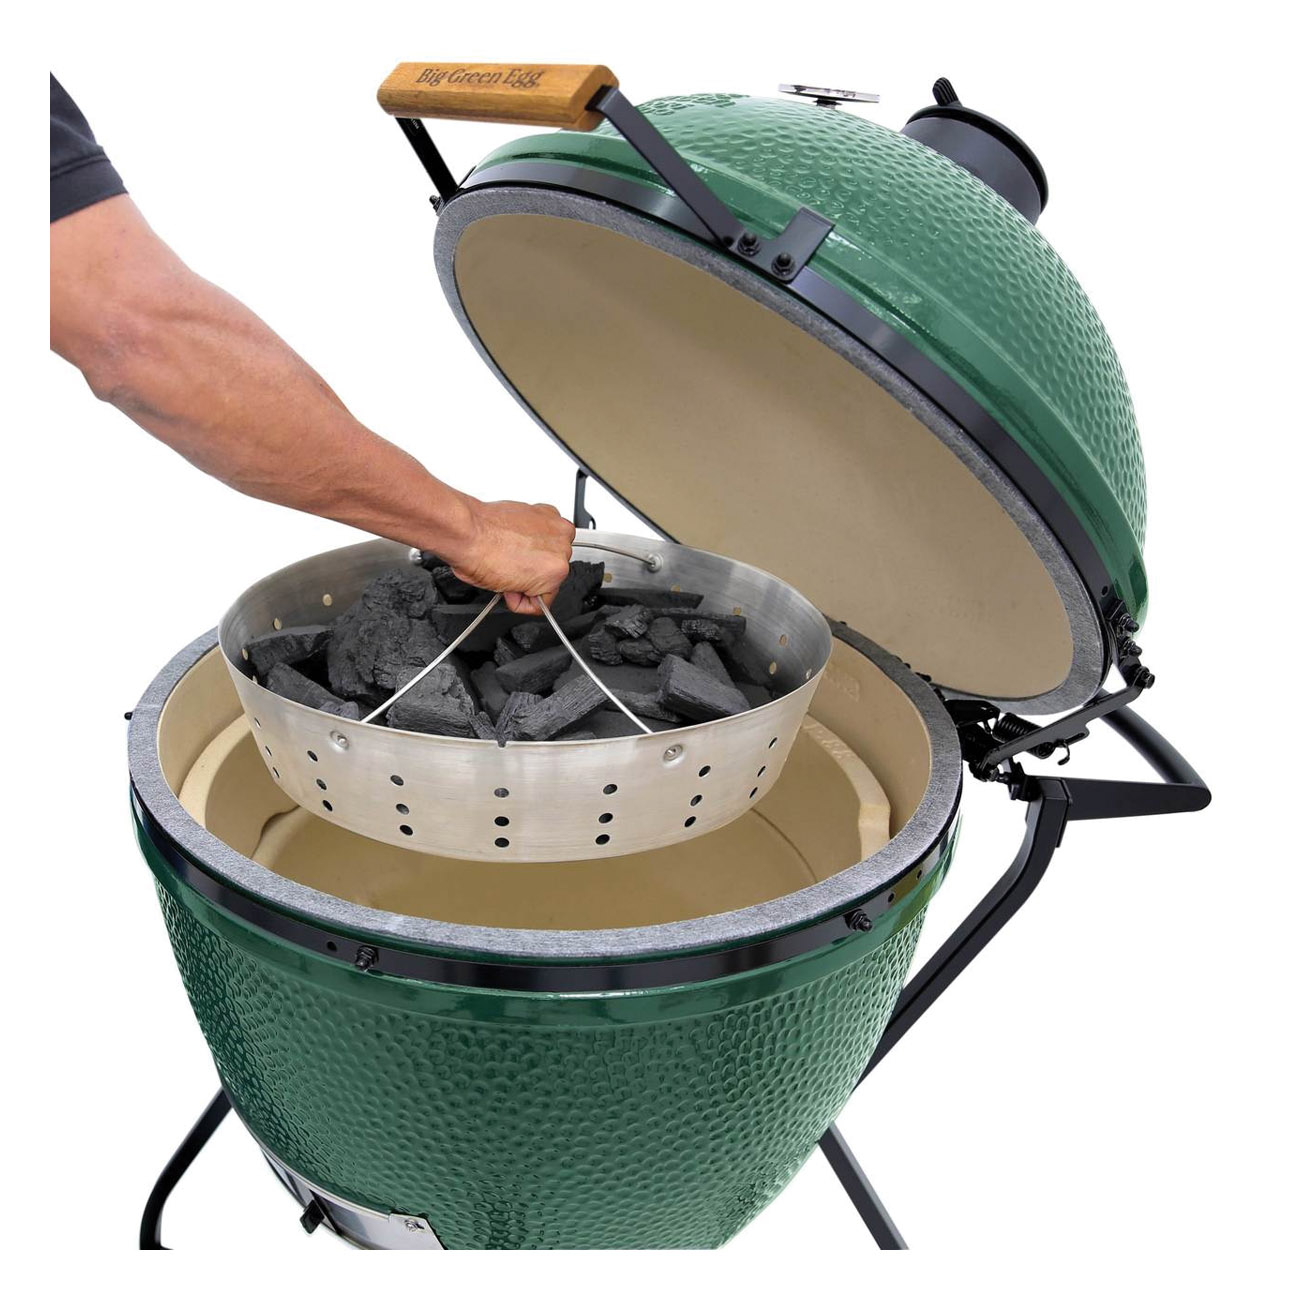 Big Green Egg 122681 Fire Bowl, Stainless Steel, For: XL Egg - 3